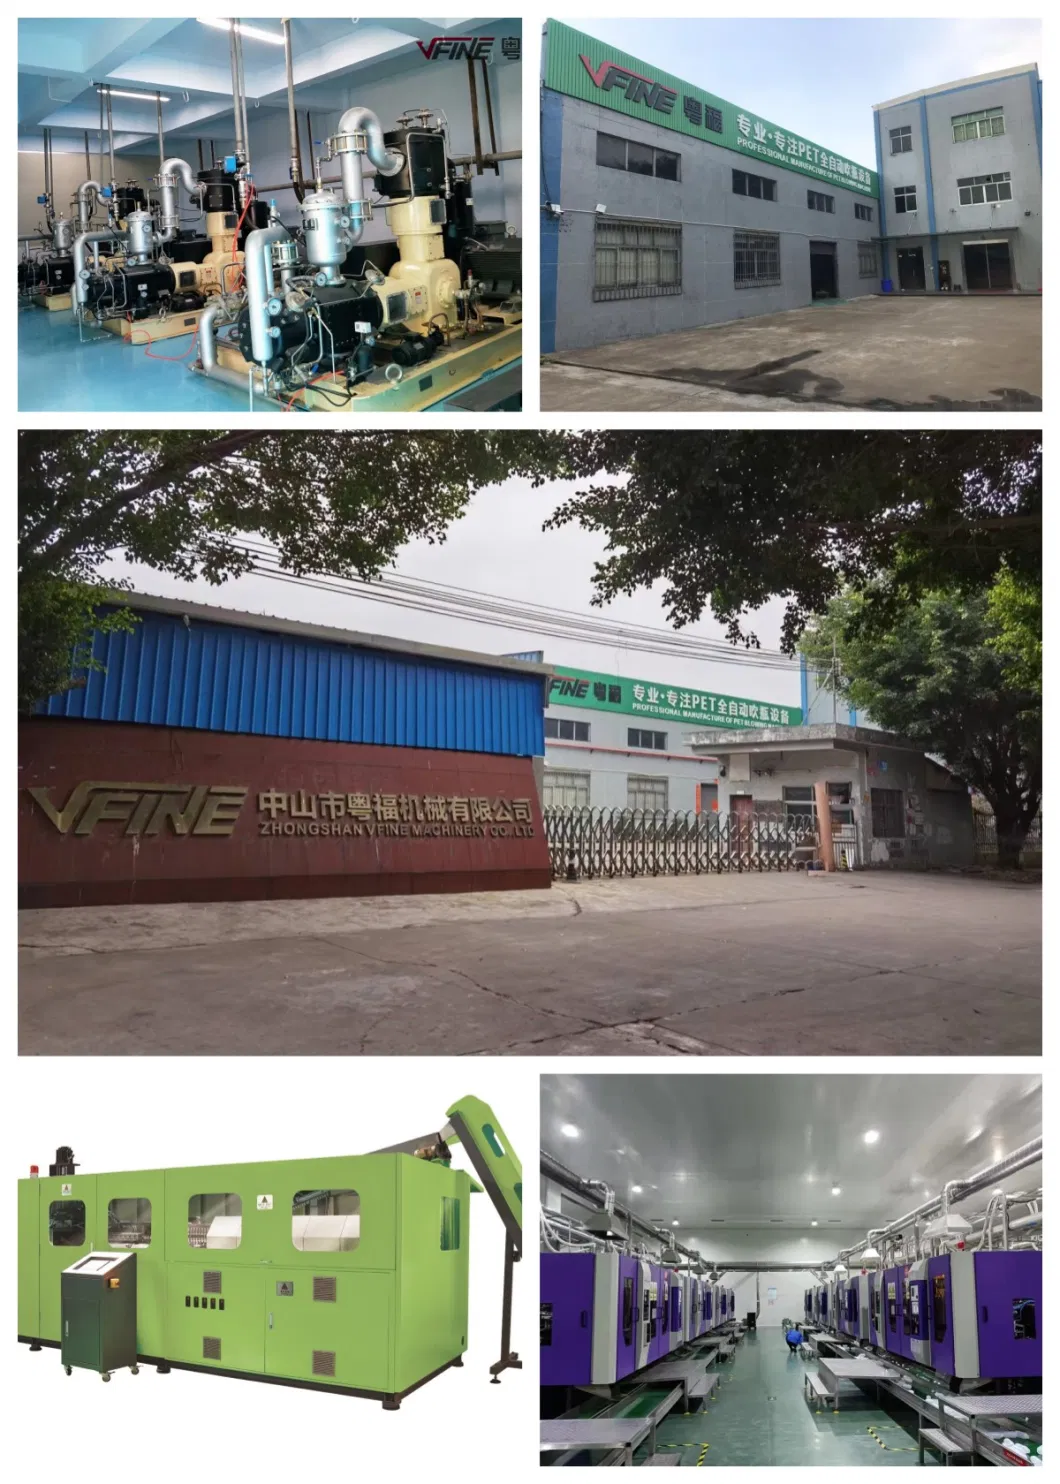 HDPE PP PC Extrusion Bottle Blow Molding Moulding Making Machine Auto Automatic Fully Manufacturer Maker Factory Blowing Price Cost Container Tank Pet Jerry Can